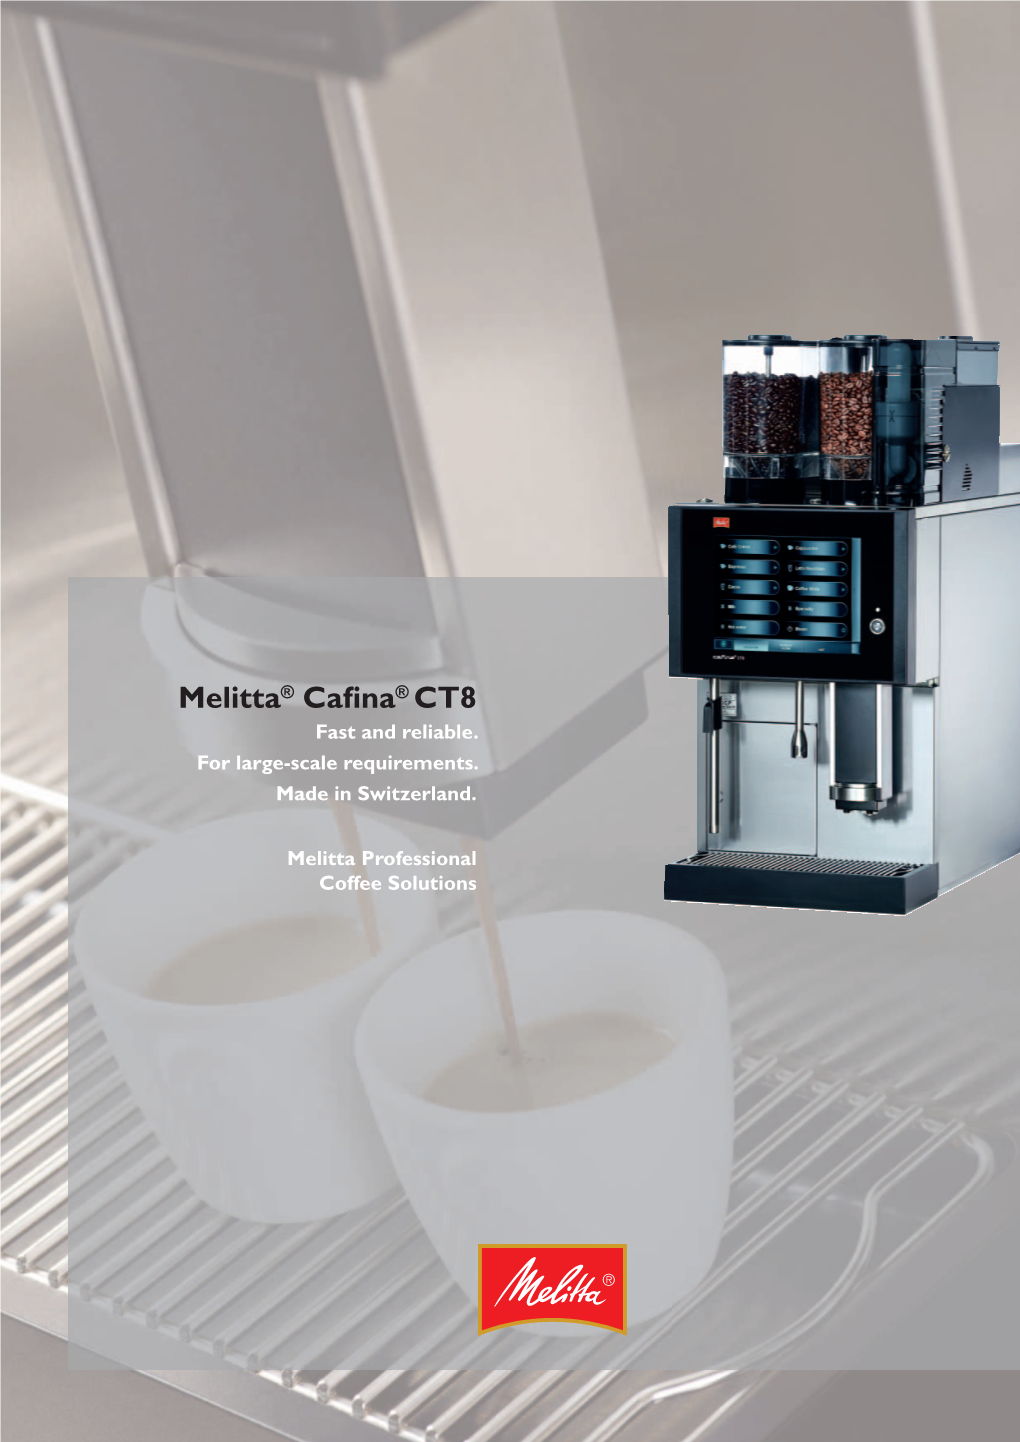 Cafina CT8 INT 2015.Inddafina CT8 INT 2015.Indd 1 118.02.158.02.15 10:5810:58 for MAXIMUM PERFORMANCE and EASE of OPERATION